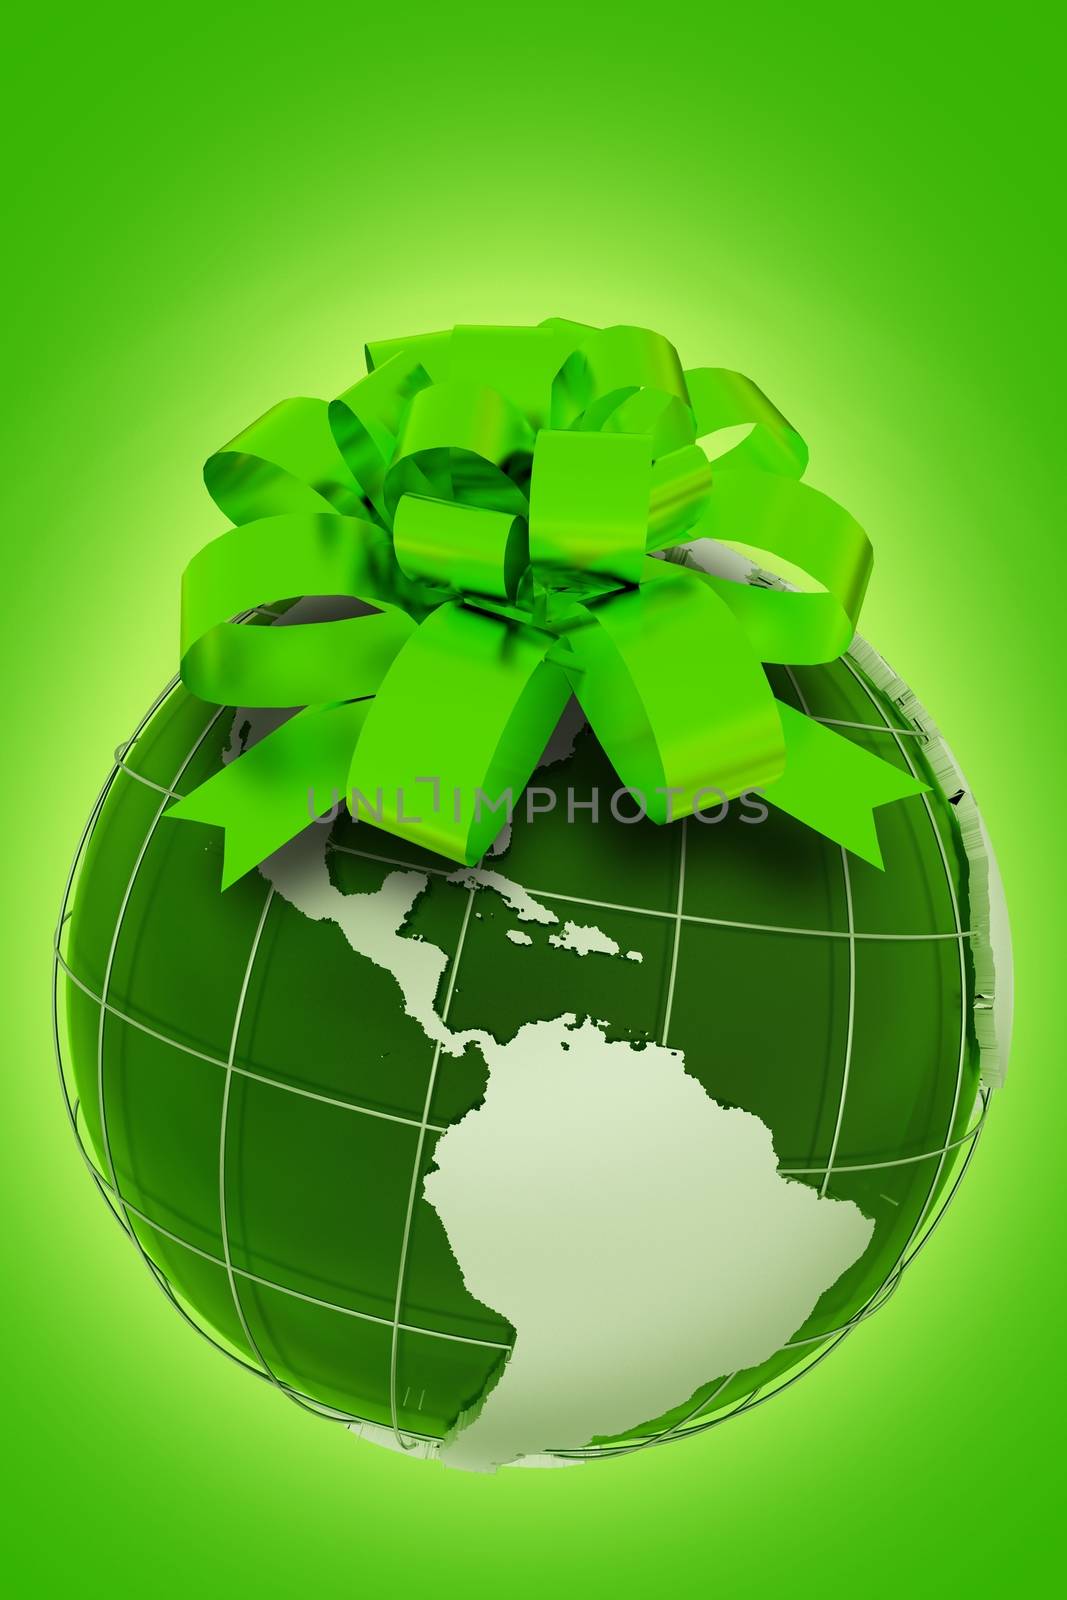 Planet Gift. Green Ecologic Theme with Earth Model with Green Bow. Vertical Eco Design. Glowing Green Background. 3D Render illustration.